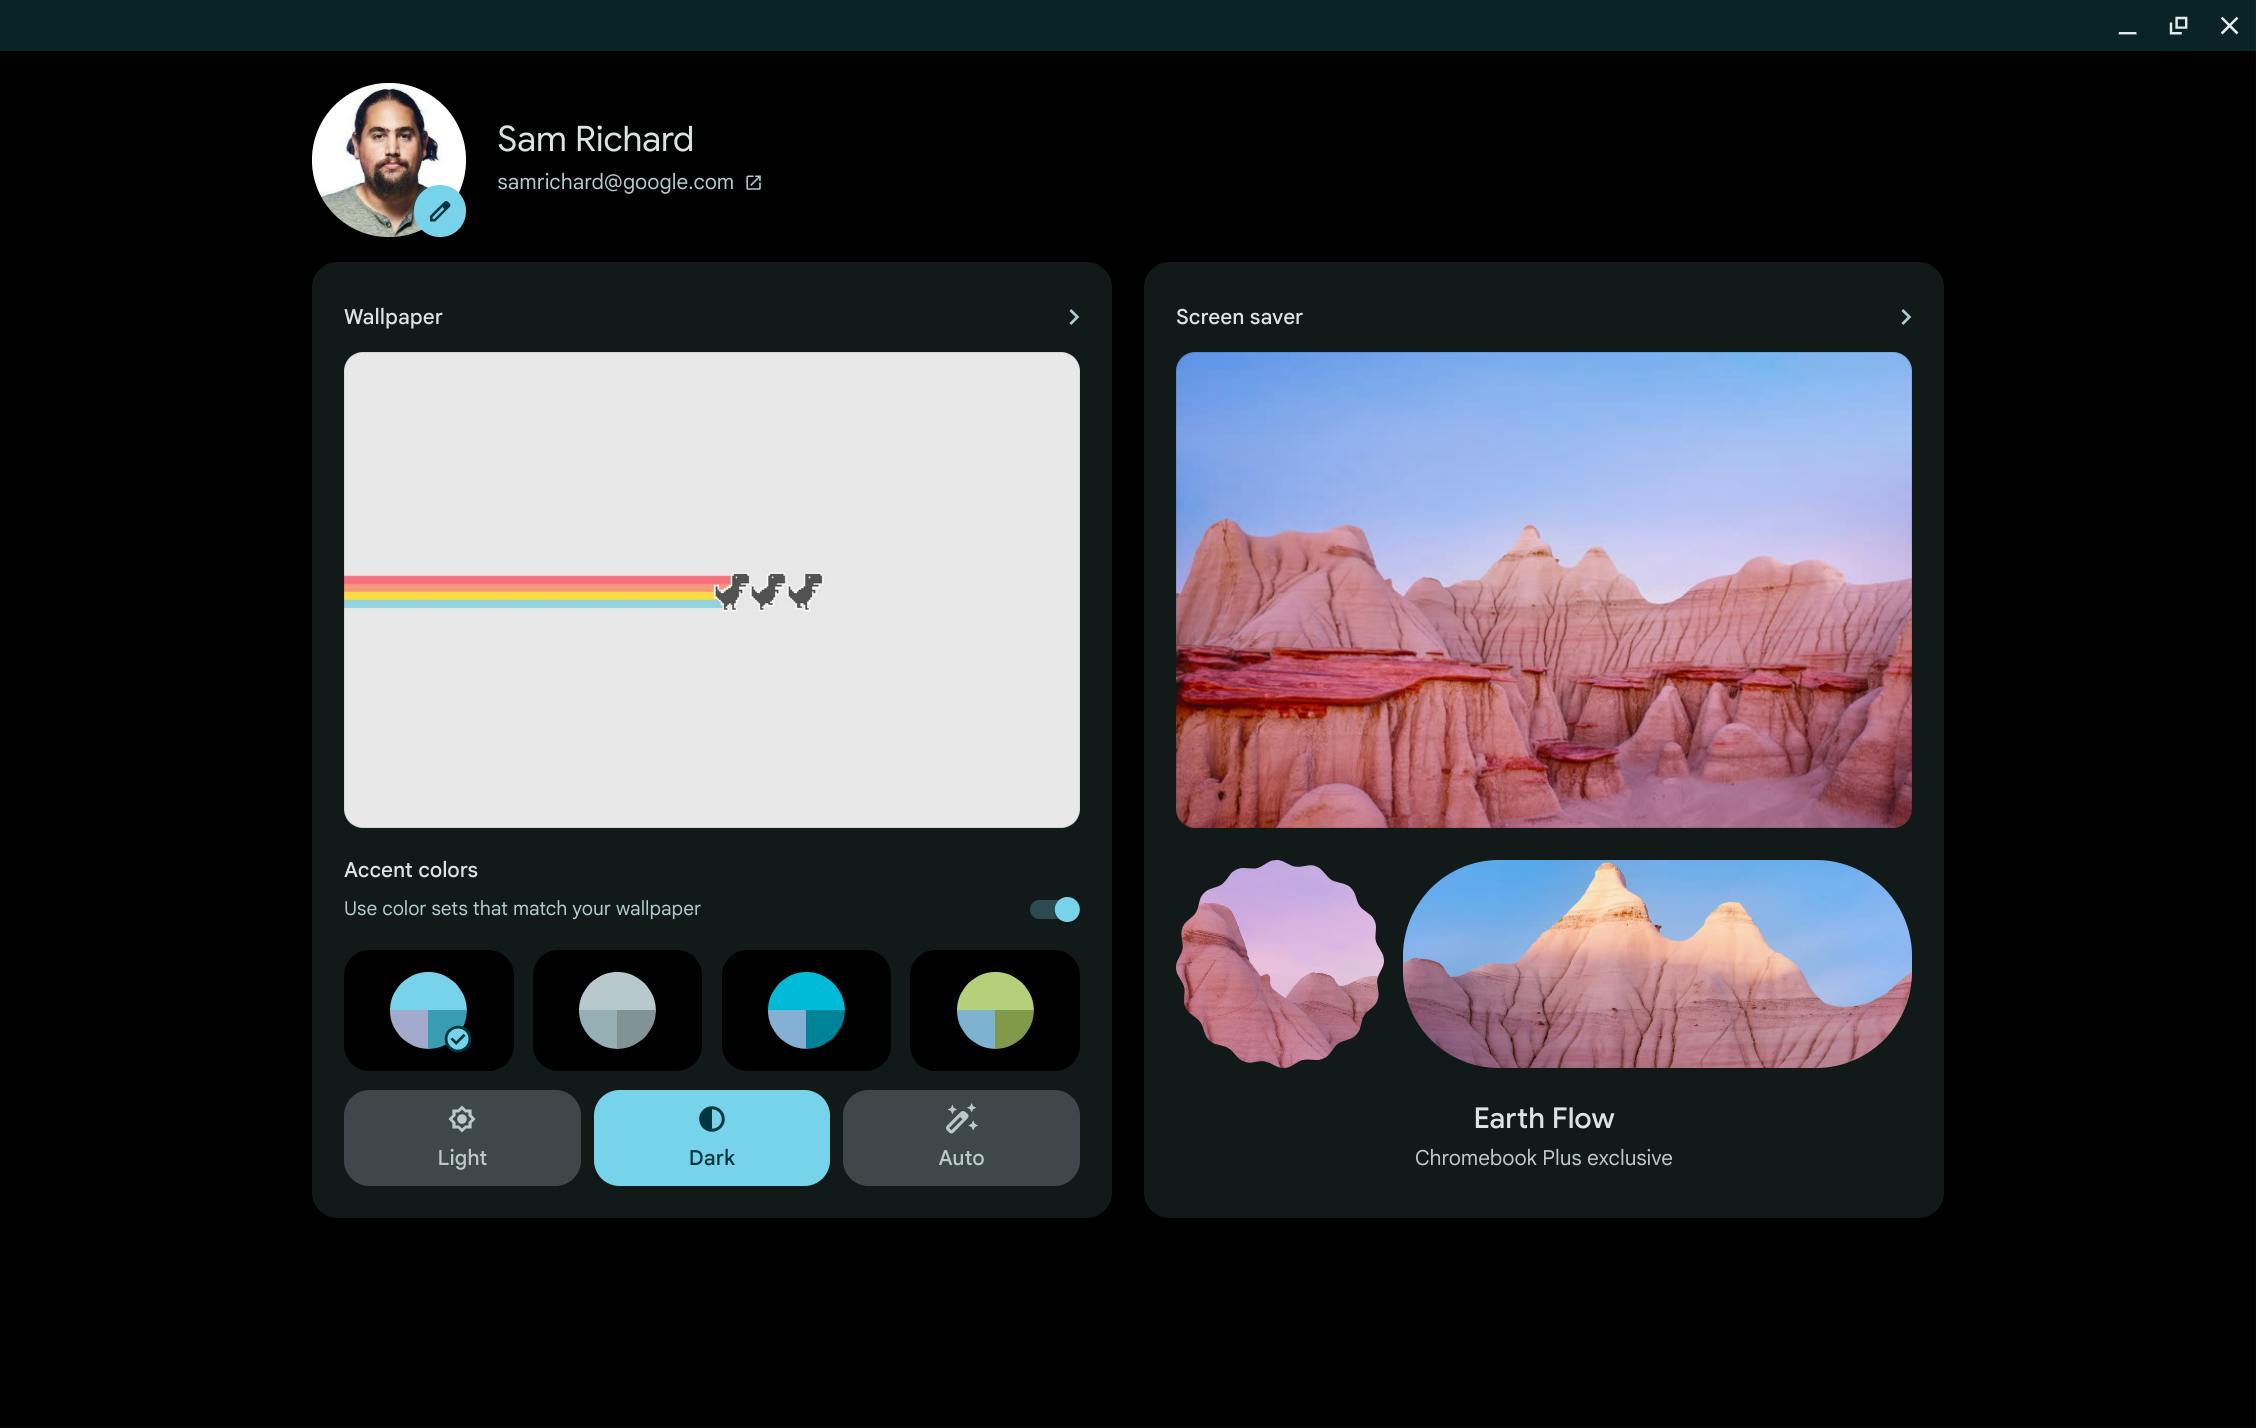 The wallpaper and screen saver settings screen, showing four options for accent colors created to match the chosen wallpaper. The first set of accent colors is selected, as is dark mode, with light mode and auto also available. The Earth Flow screensaver, a Chromebook Plus exclusive, is also chosen